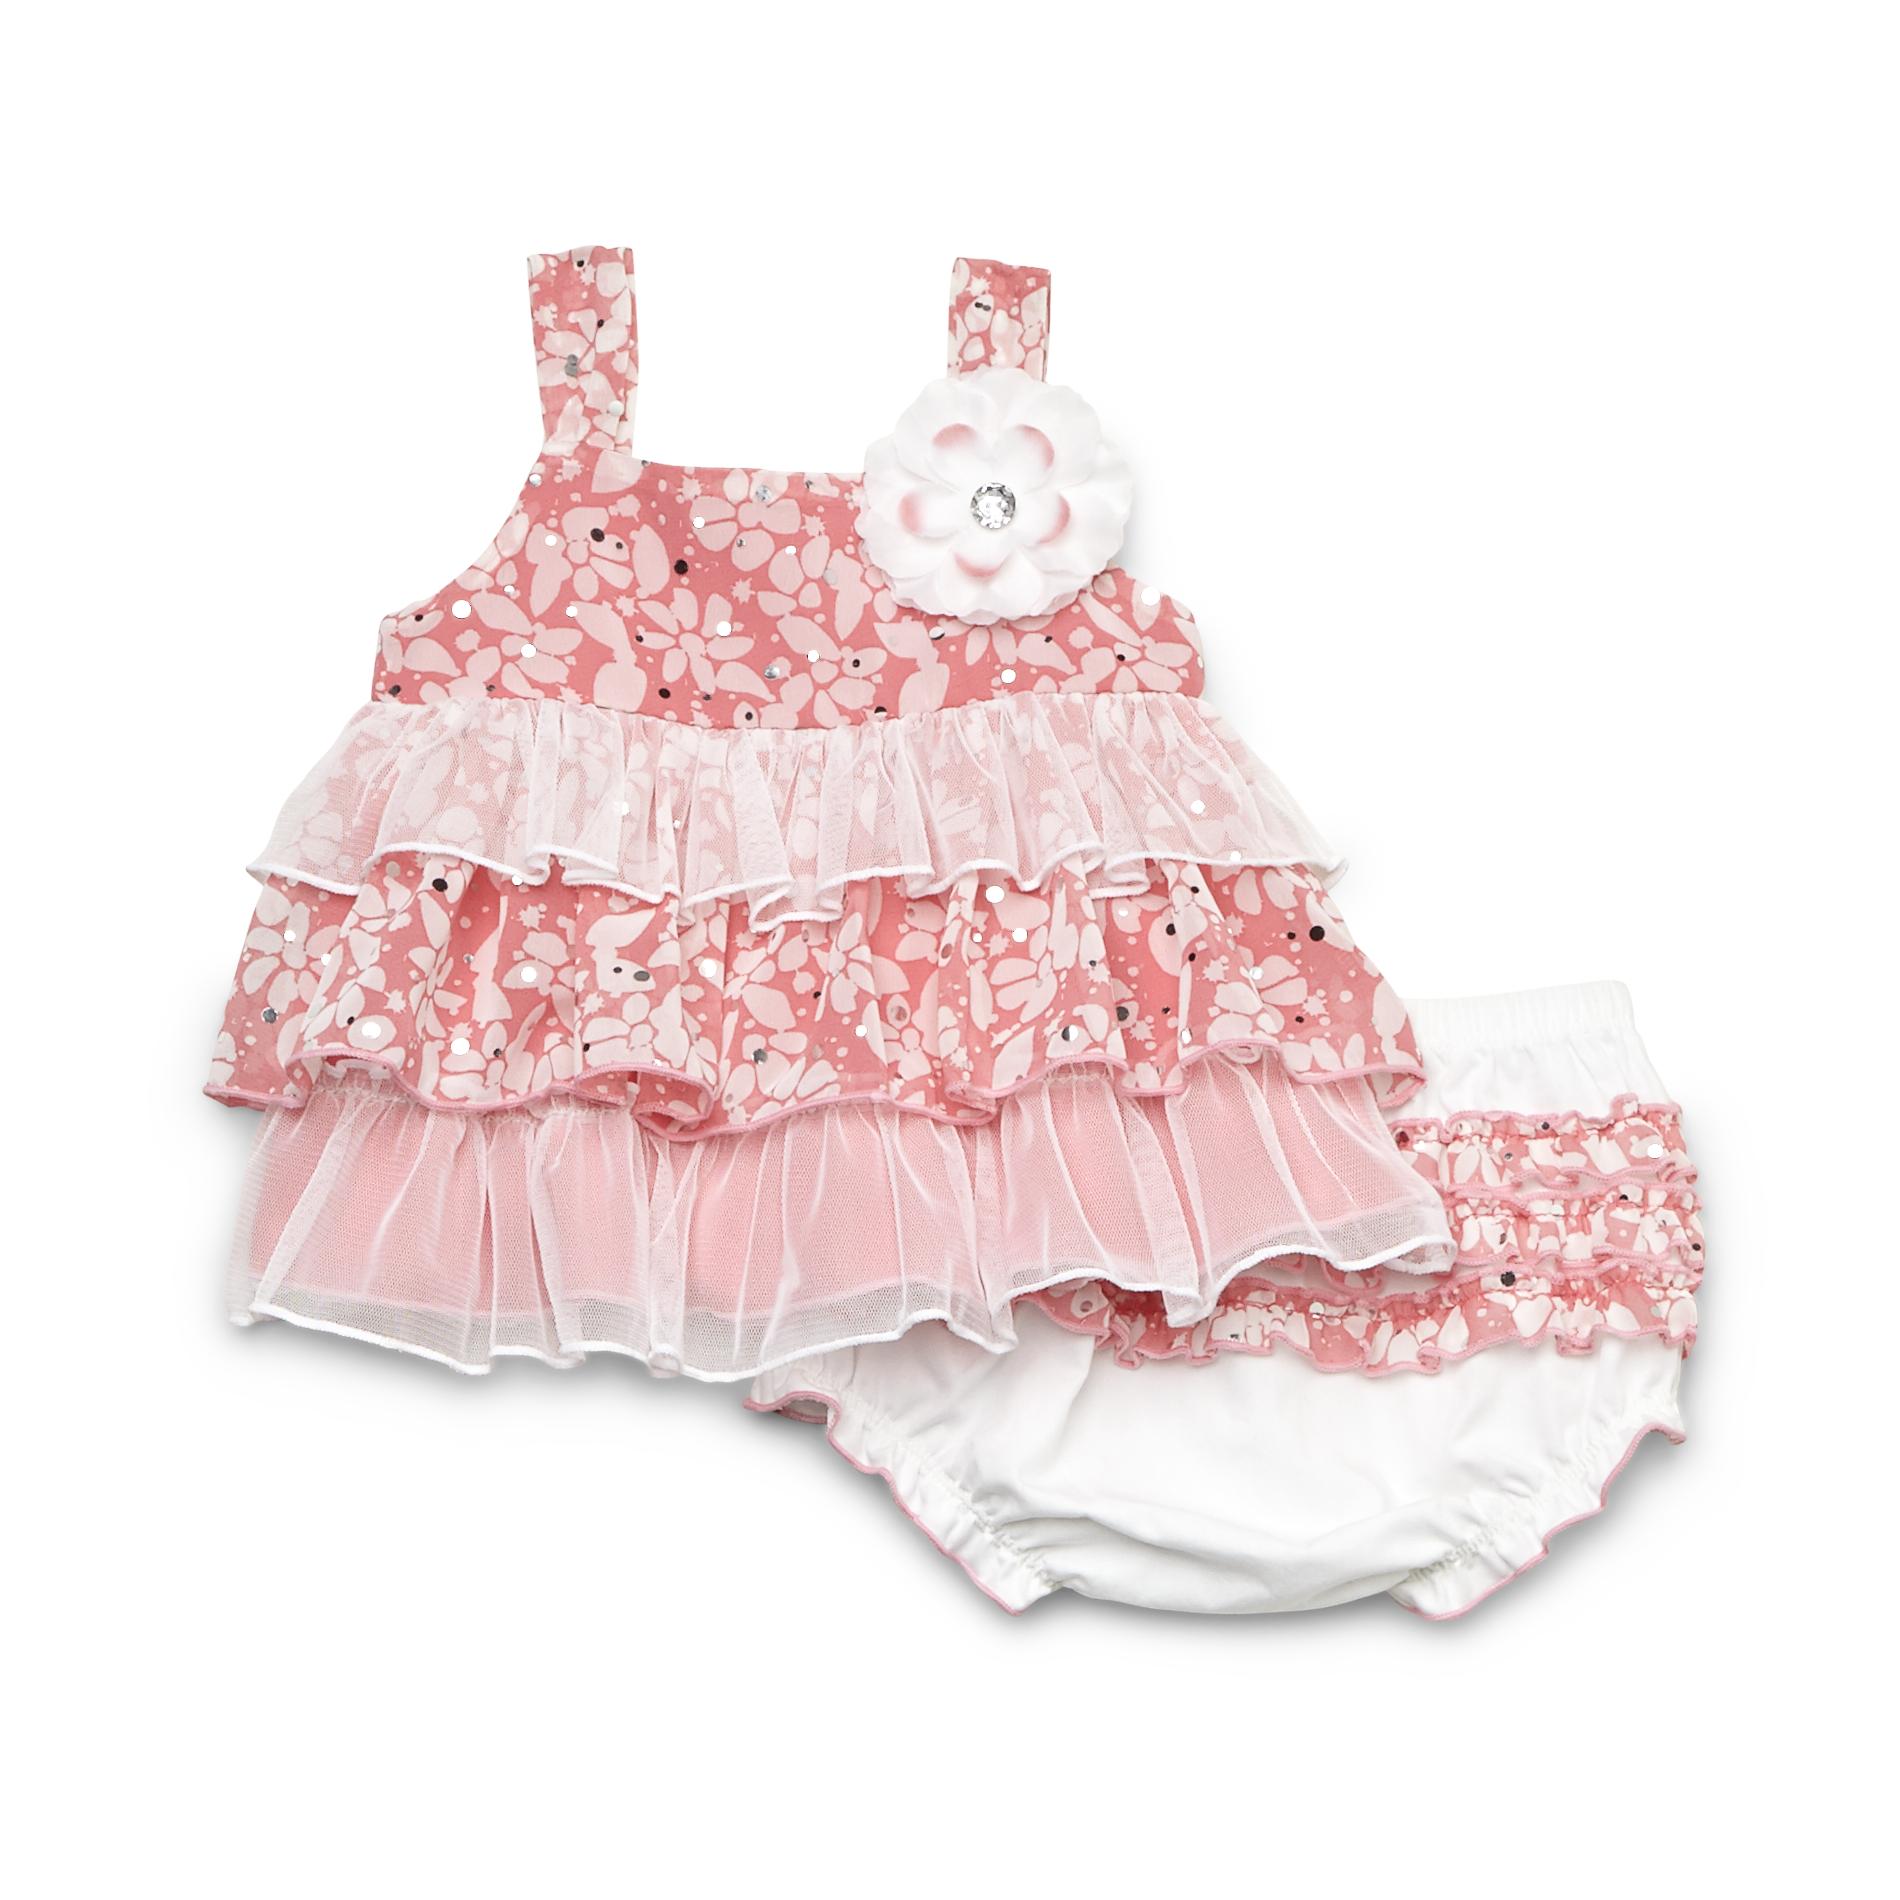 Small Wonders Newborn Girl's Tiered Dress & Diaper Cover - Floral Print